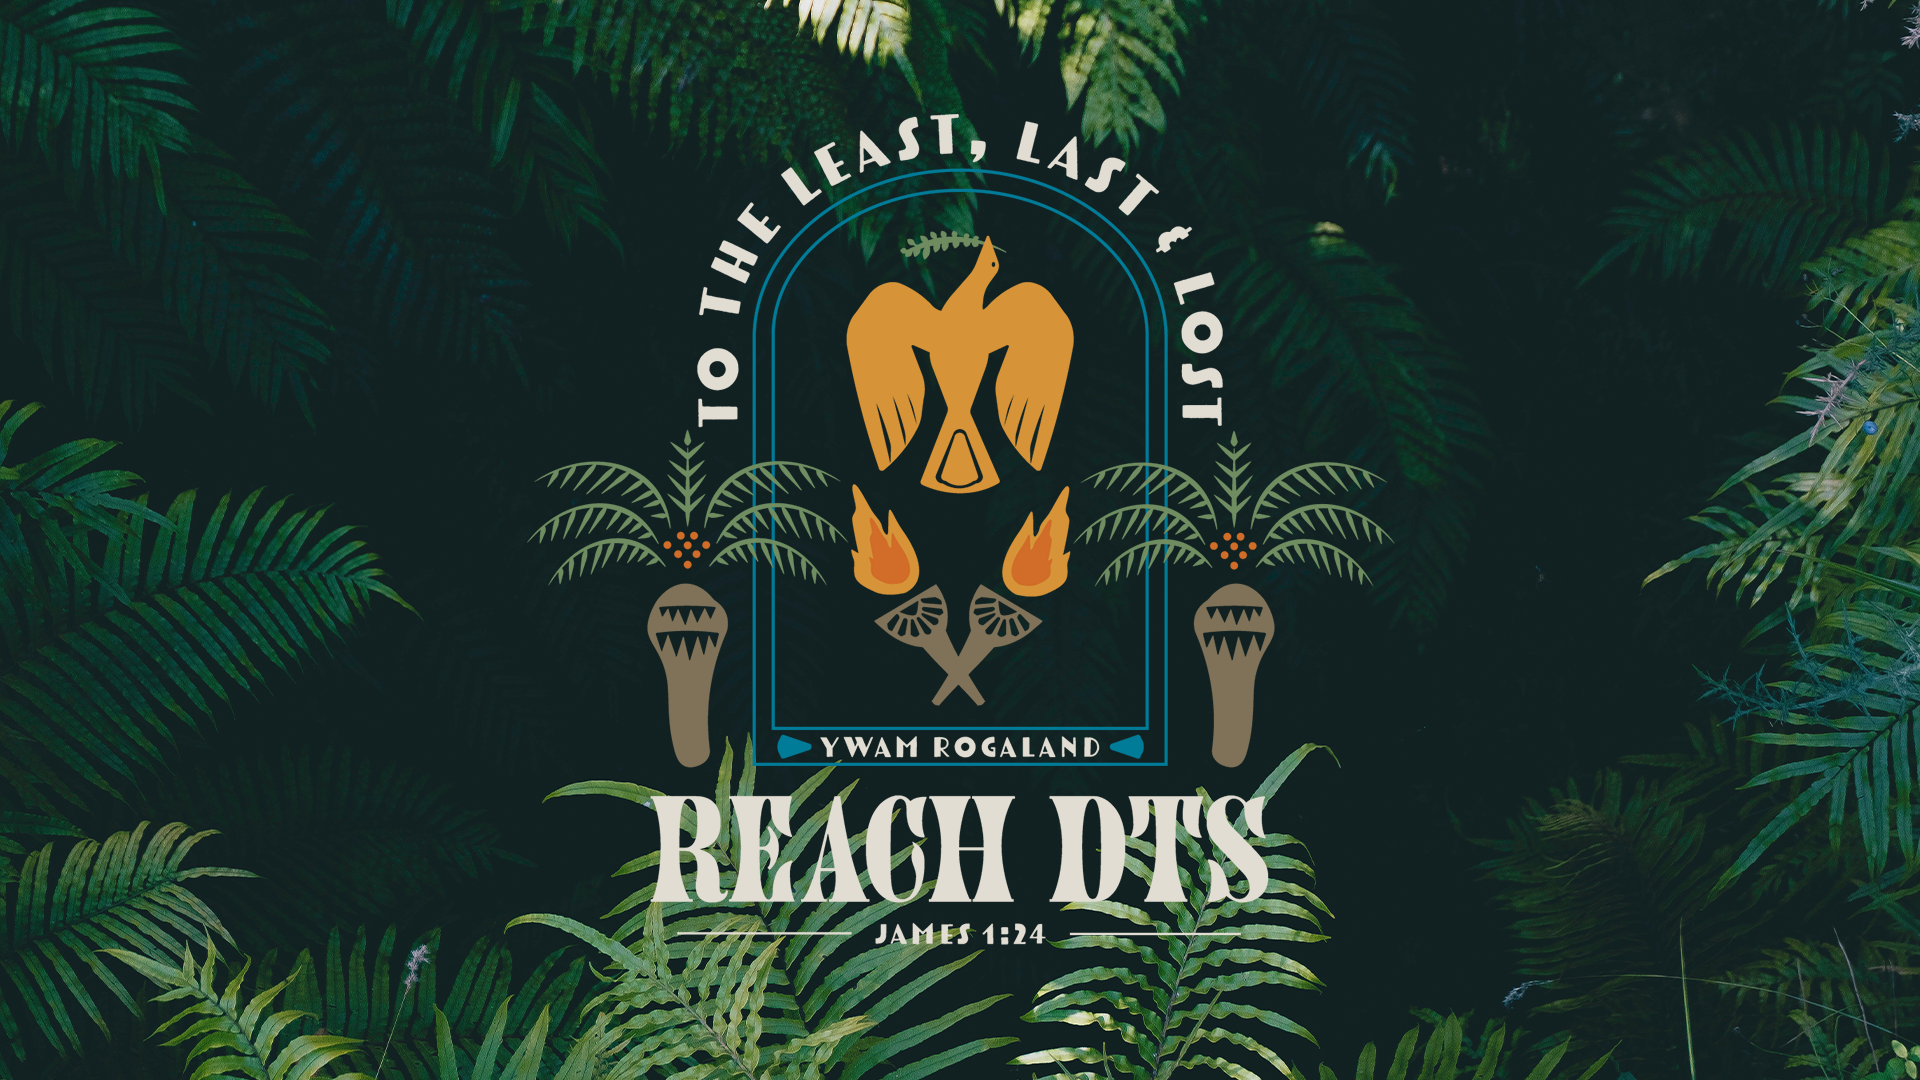   Reach DTS   September 14th, 2023 - February 16th, 2024.   More  